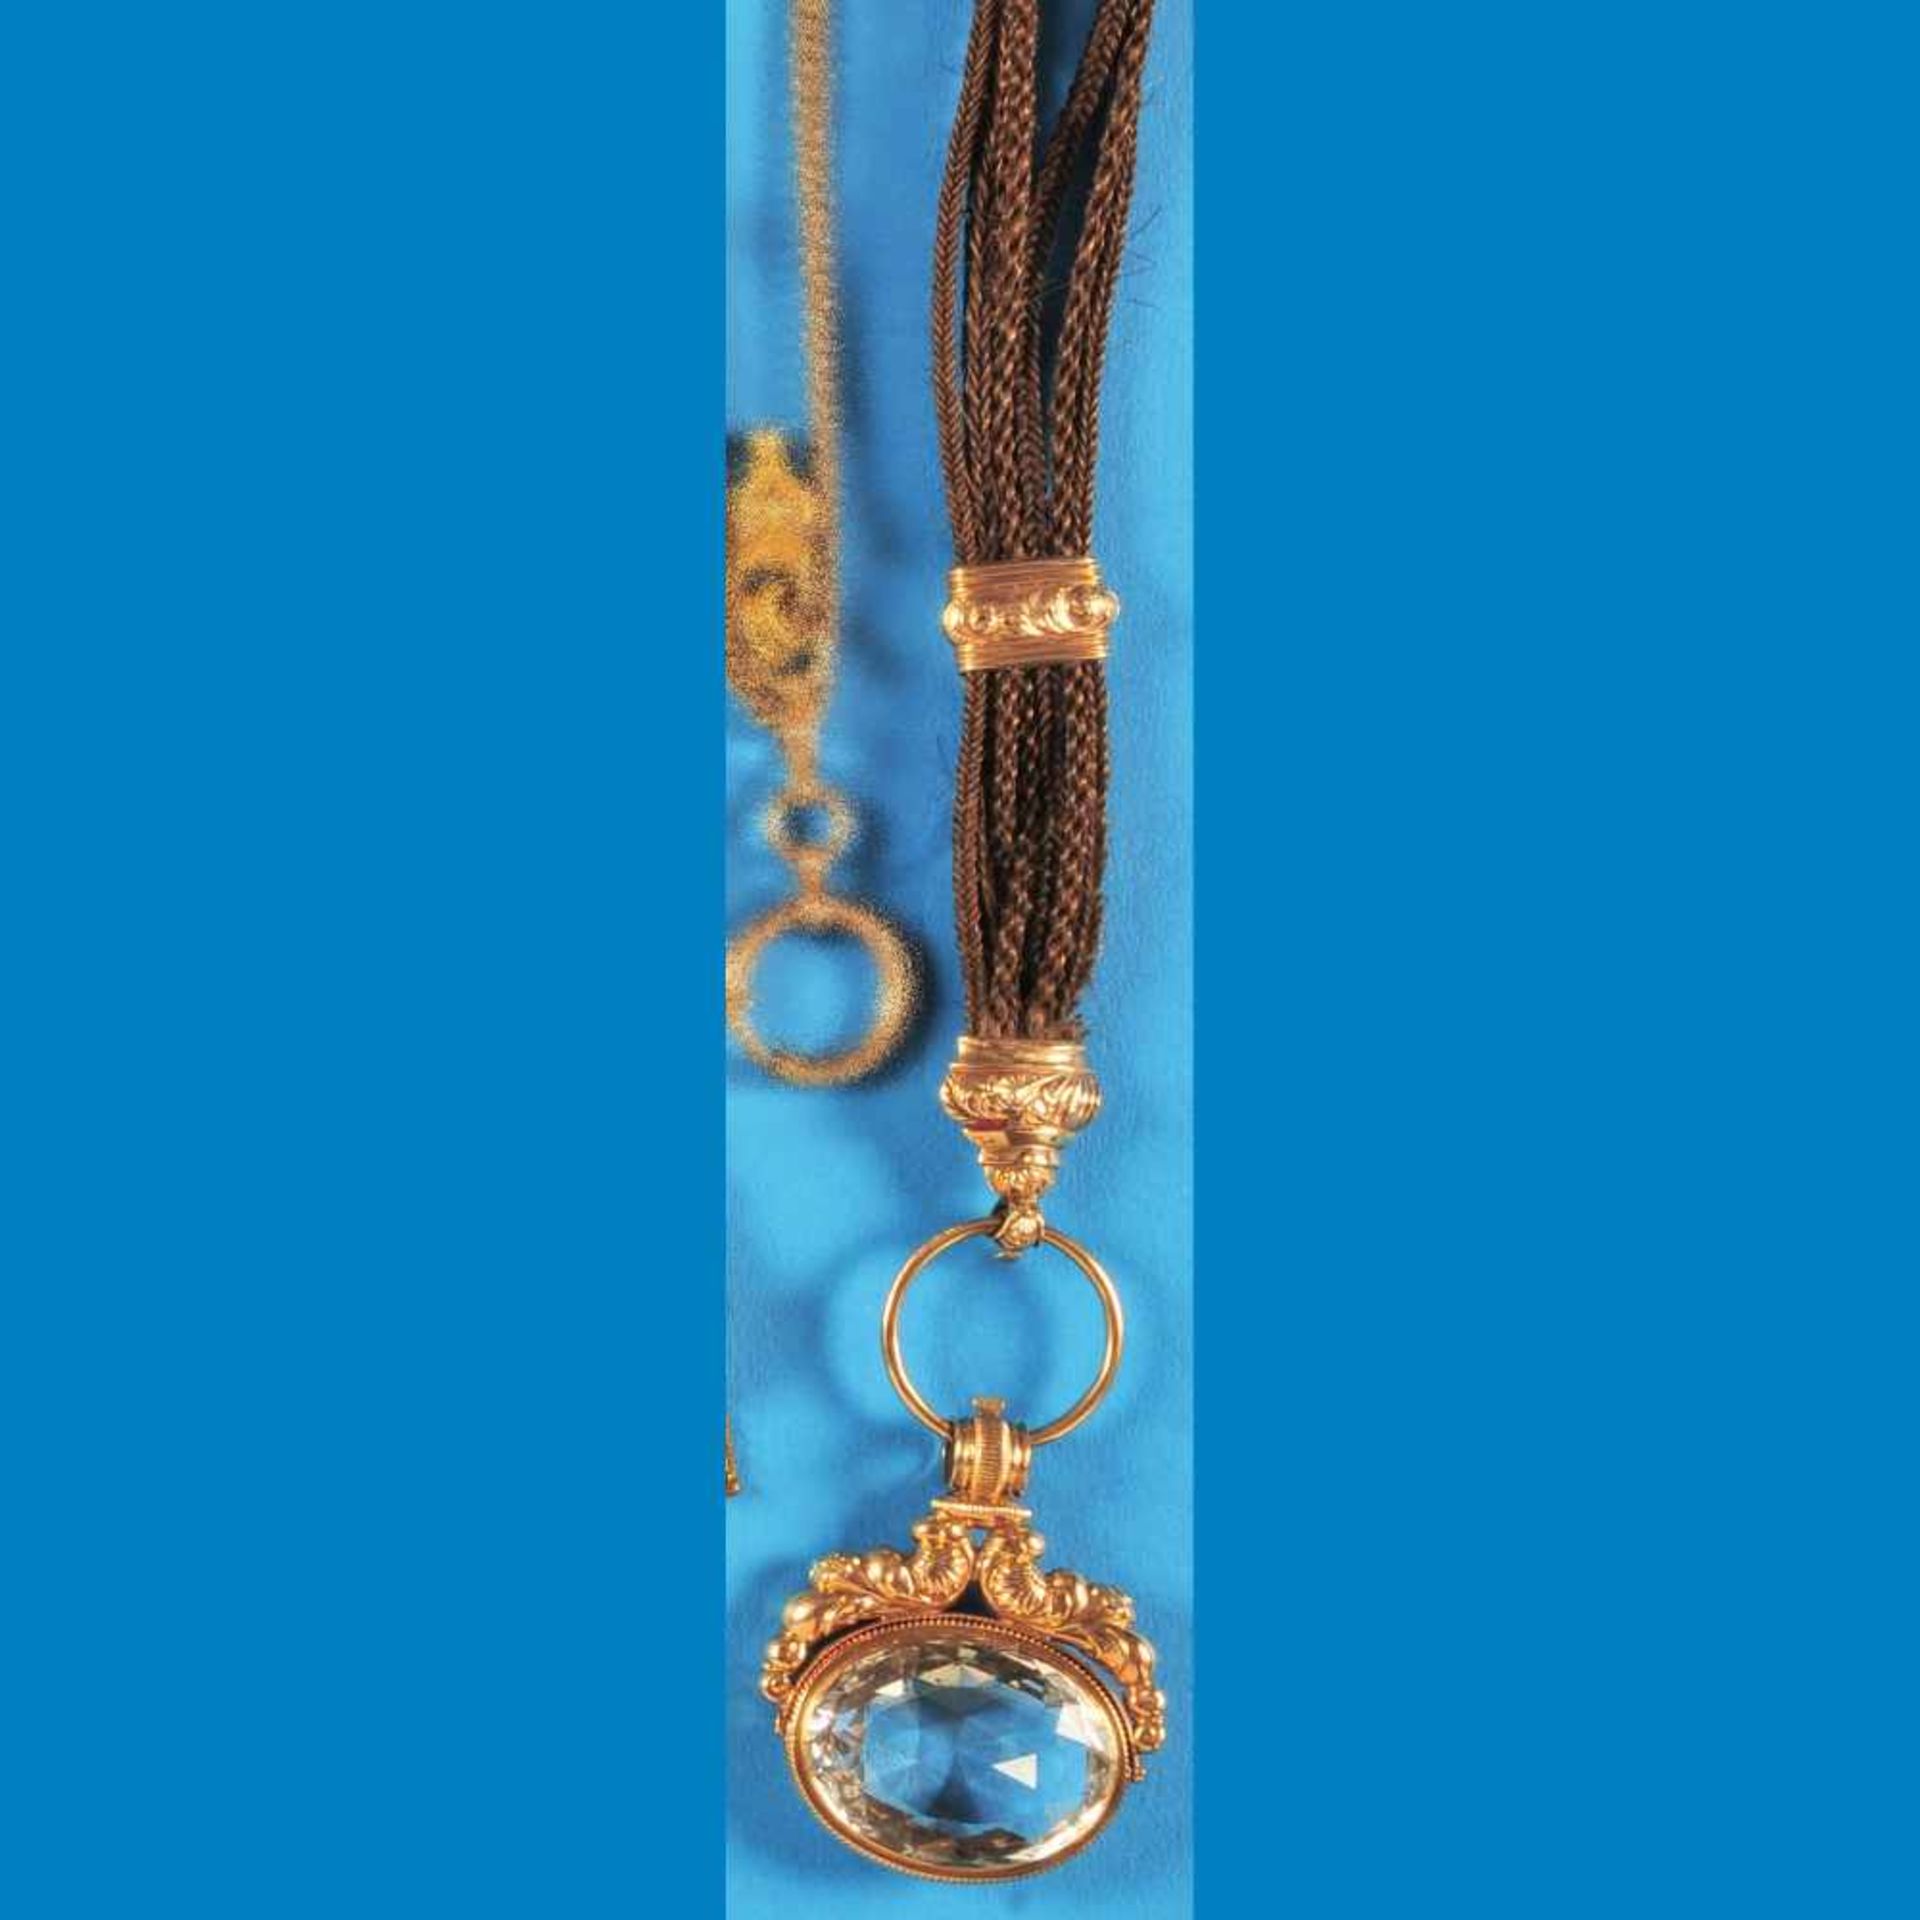 Watch chain made from hair with gold-plated slide and golden pendantHaar-Taschenuhrkette mi